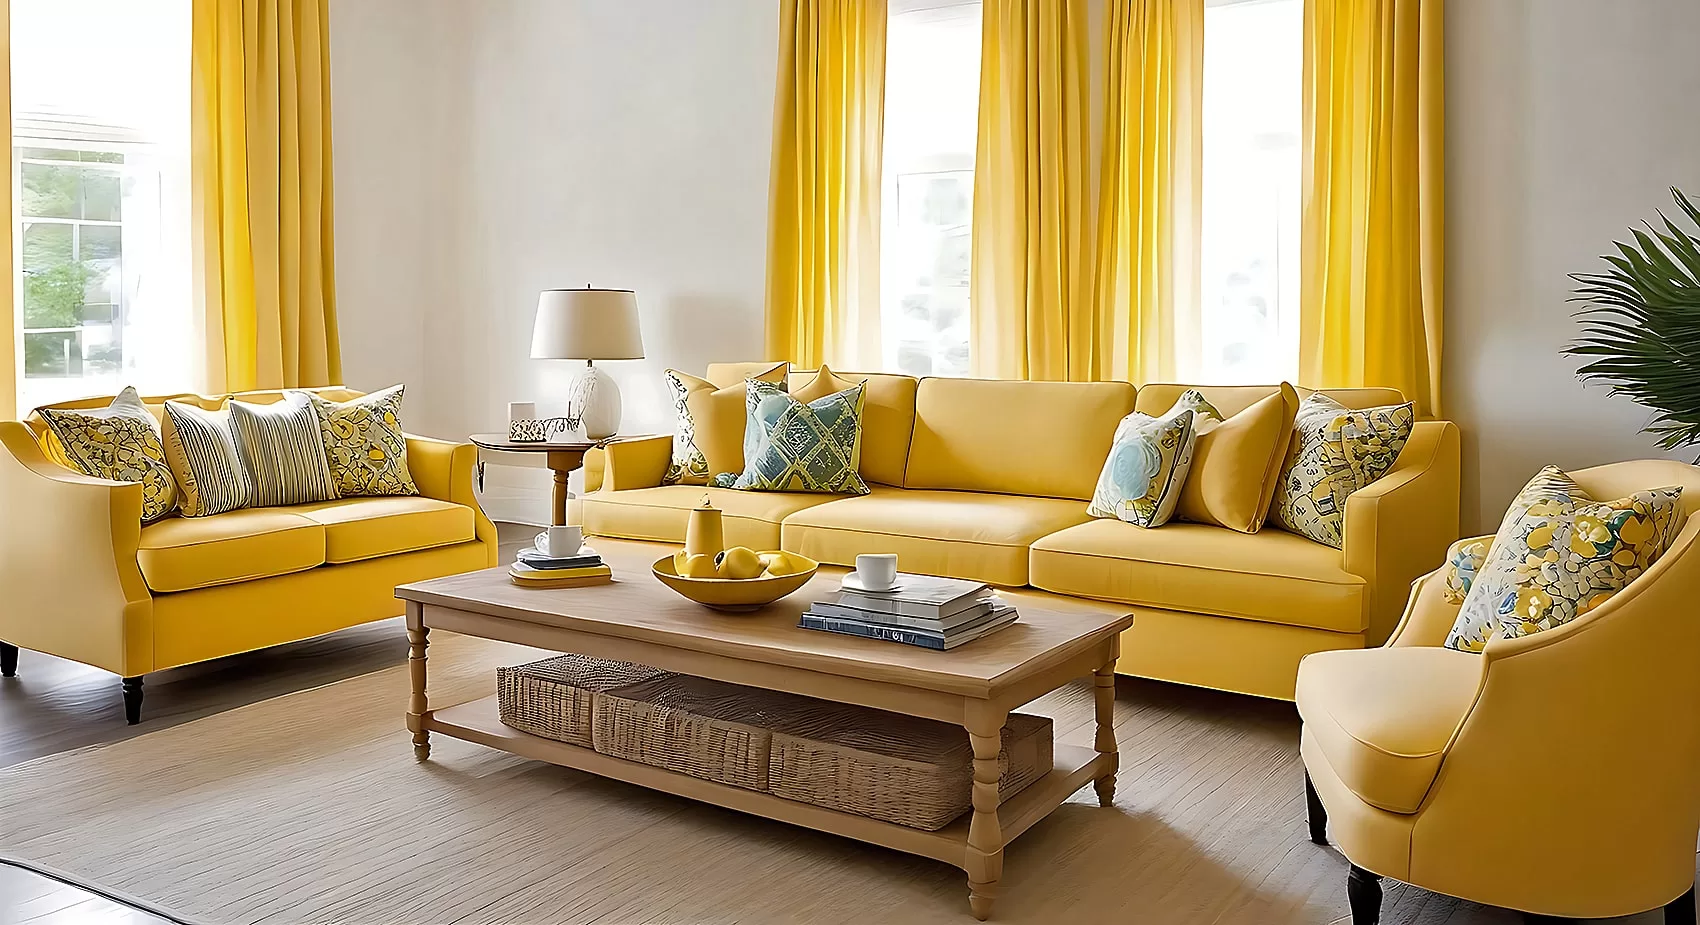 Decoration Yellow couch with other elements